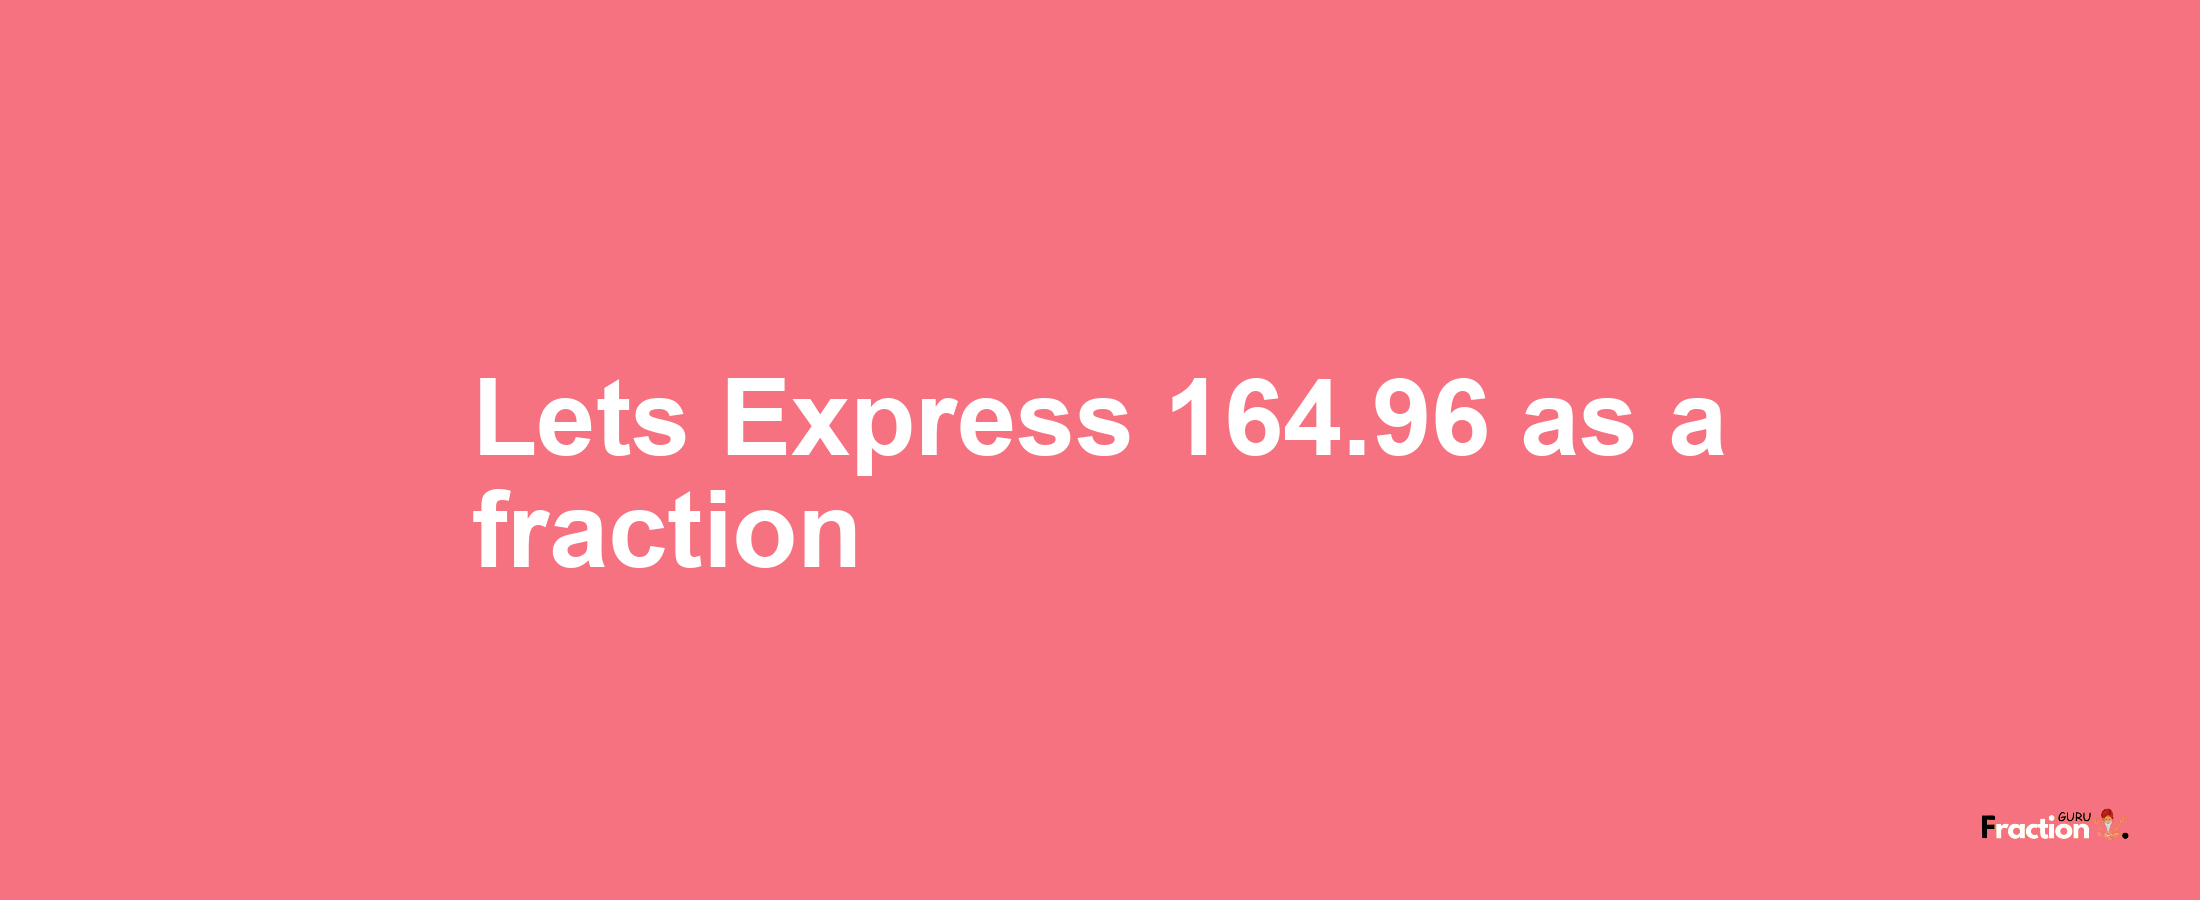 Lets Express 164.96 as afraction